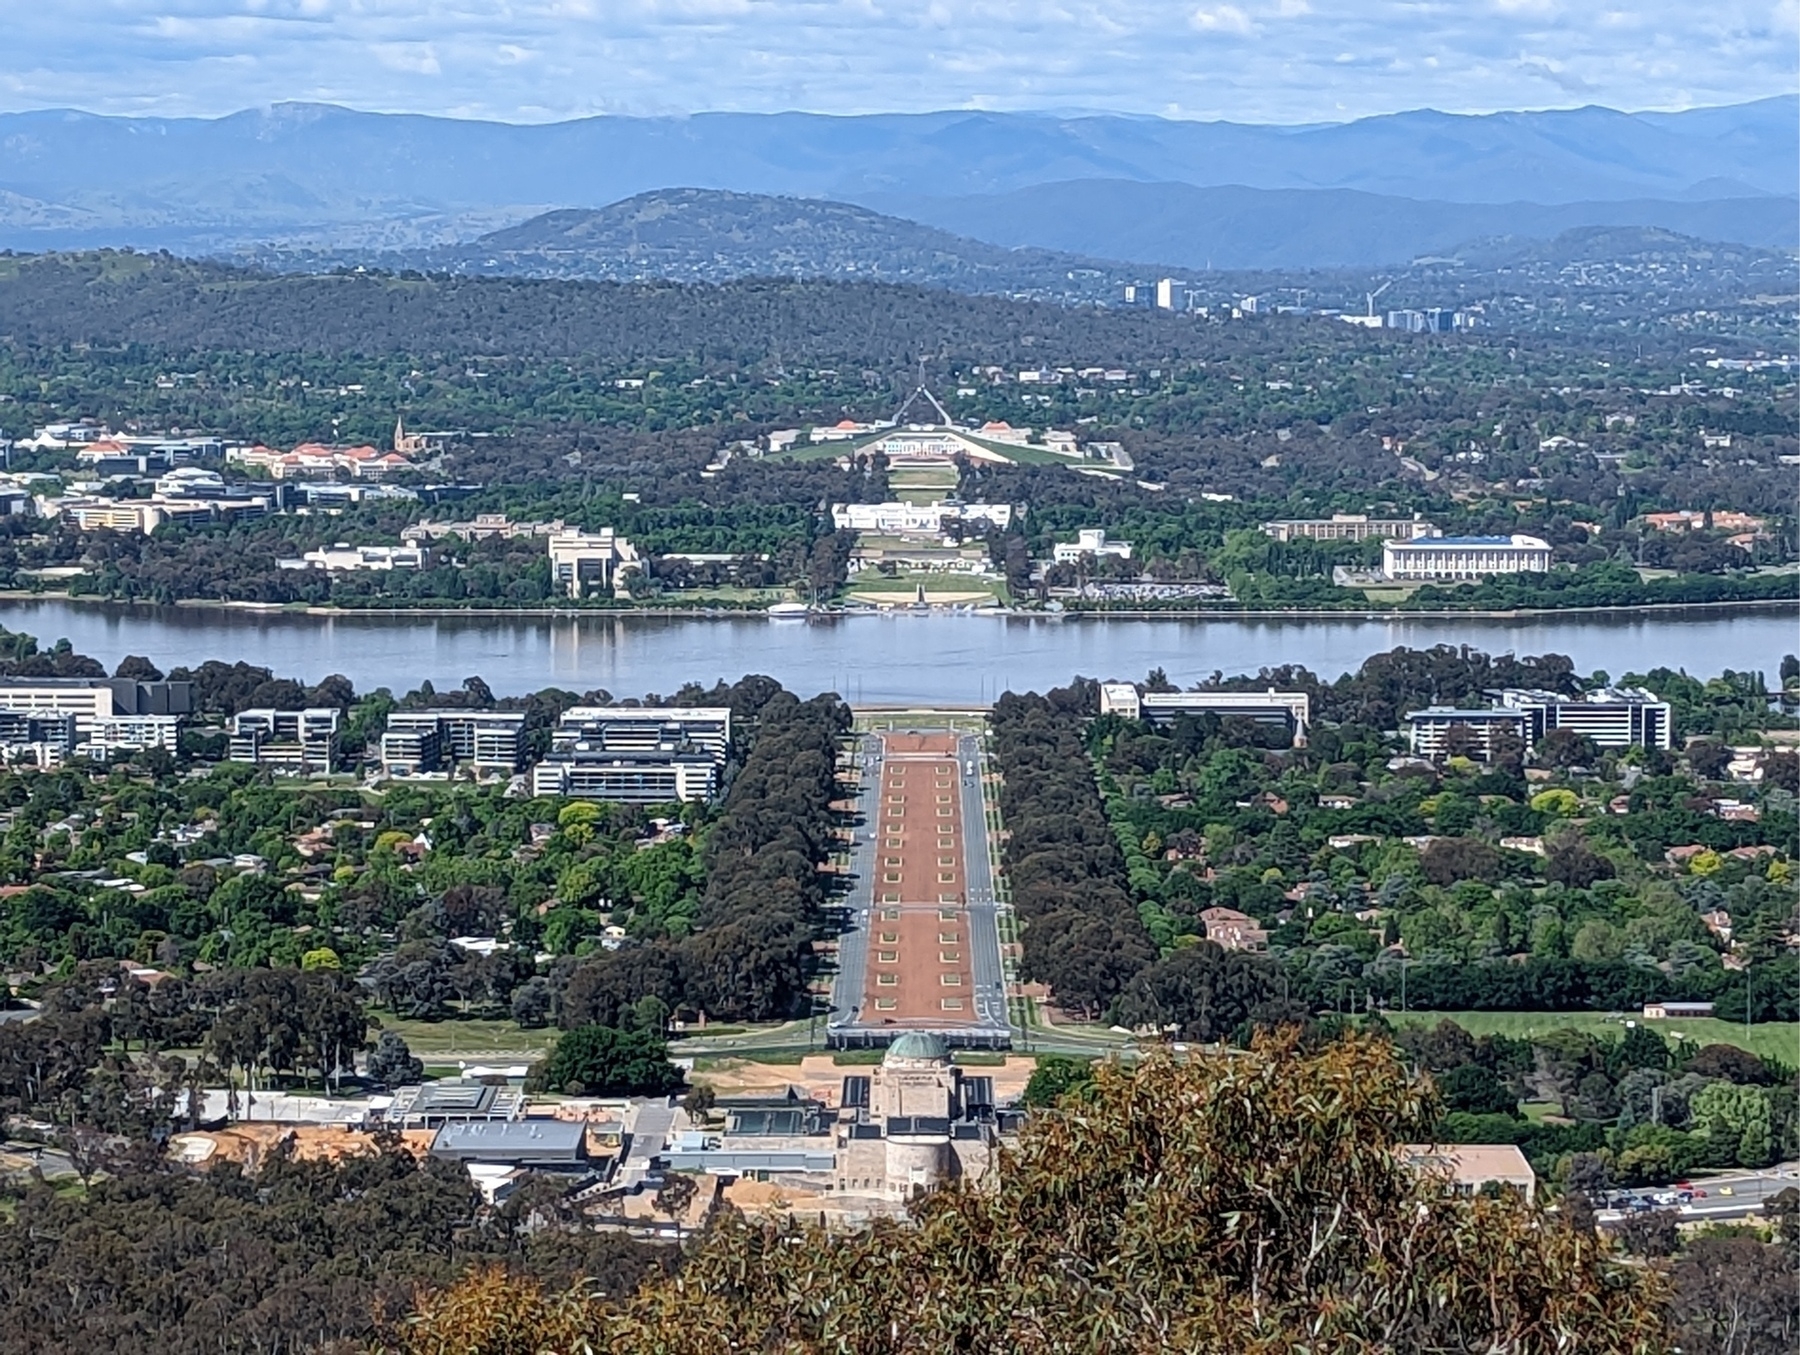 Summit of Mt. Ainslie looking to Lake Burley Griffin and Parliament House